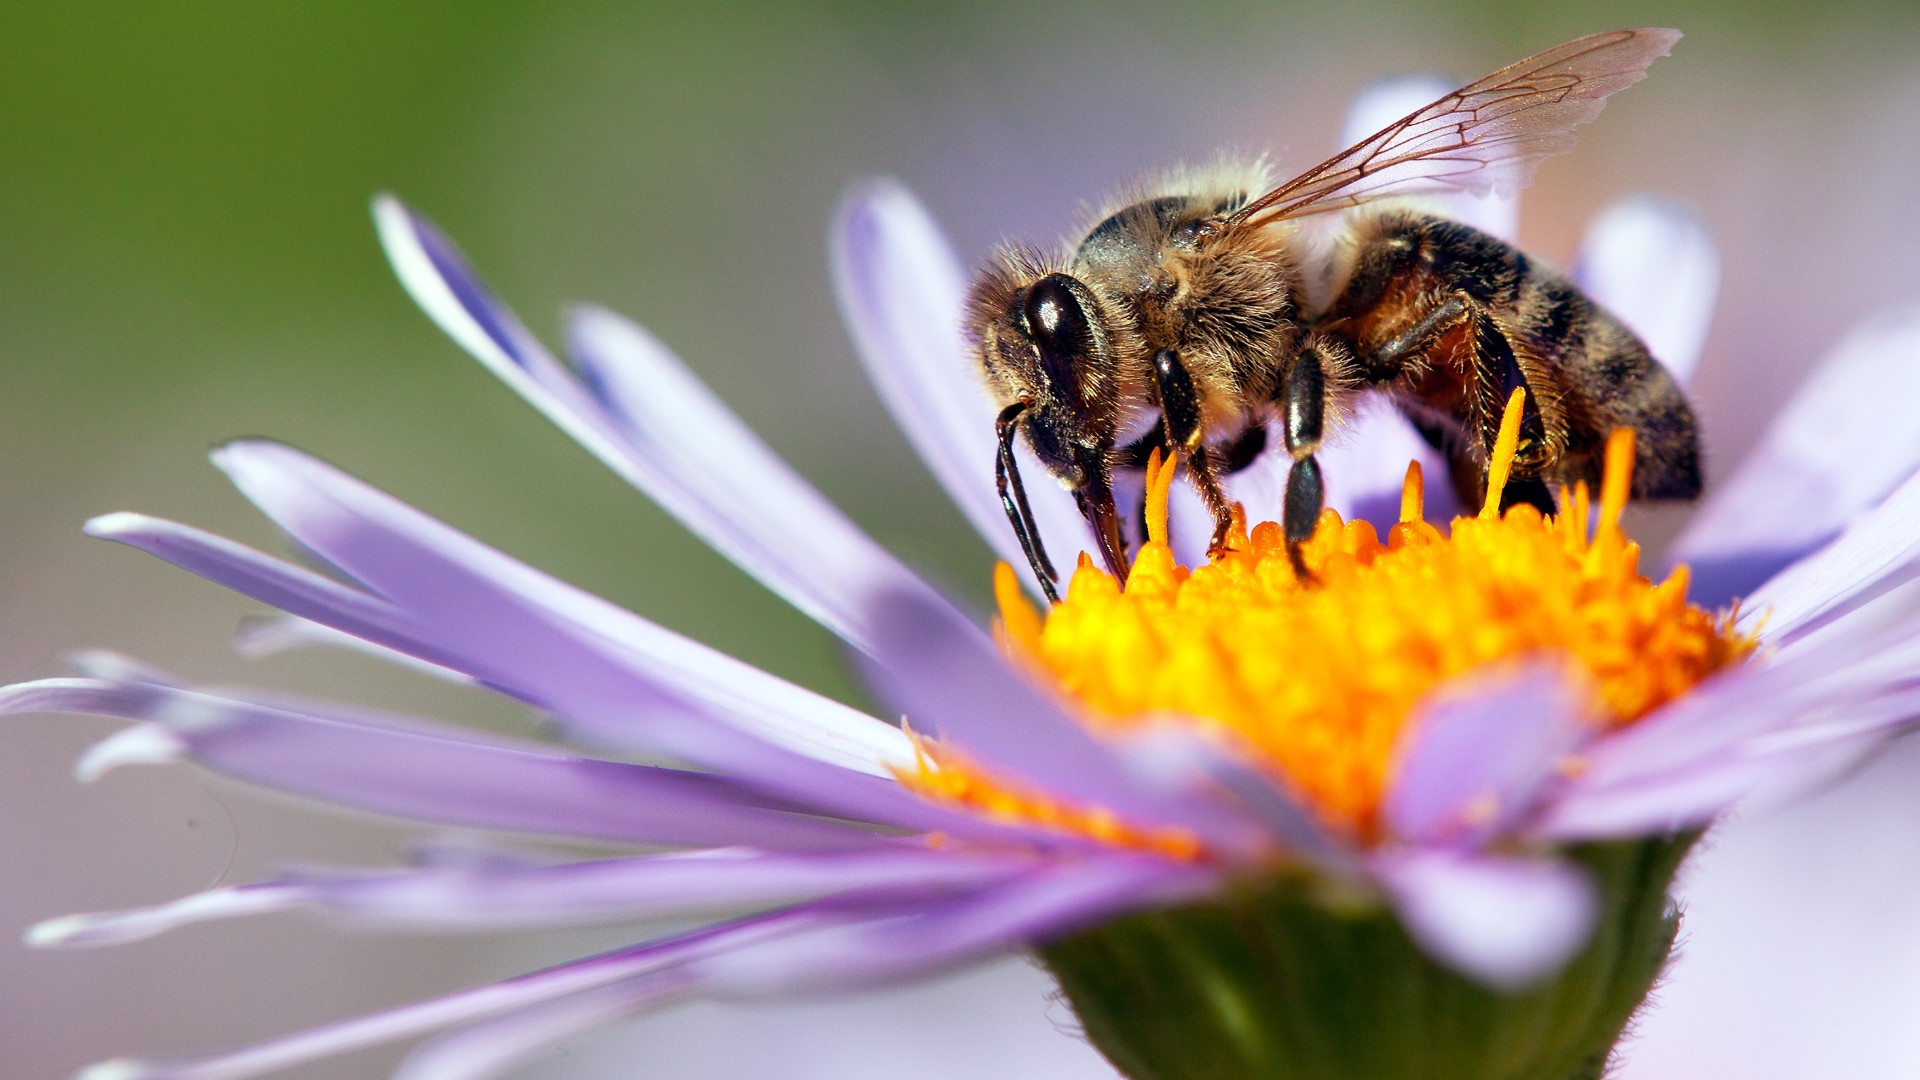 We often talk about the importance of bees and the impact they have on our environment. We asked an expert to show us a quick and cheap way to attract pollinators to our yards.